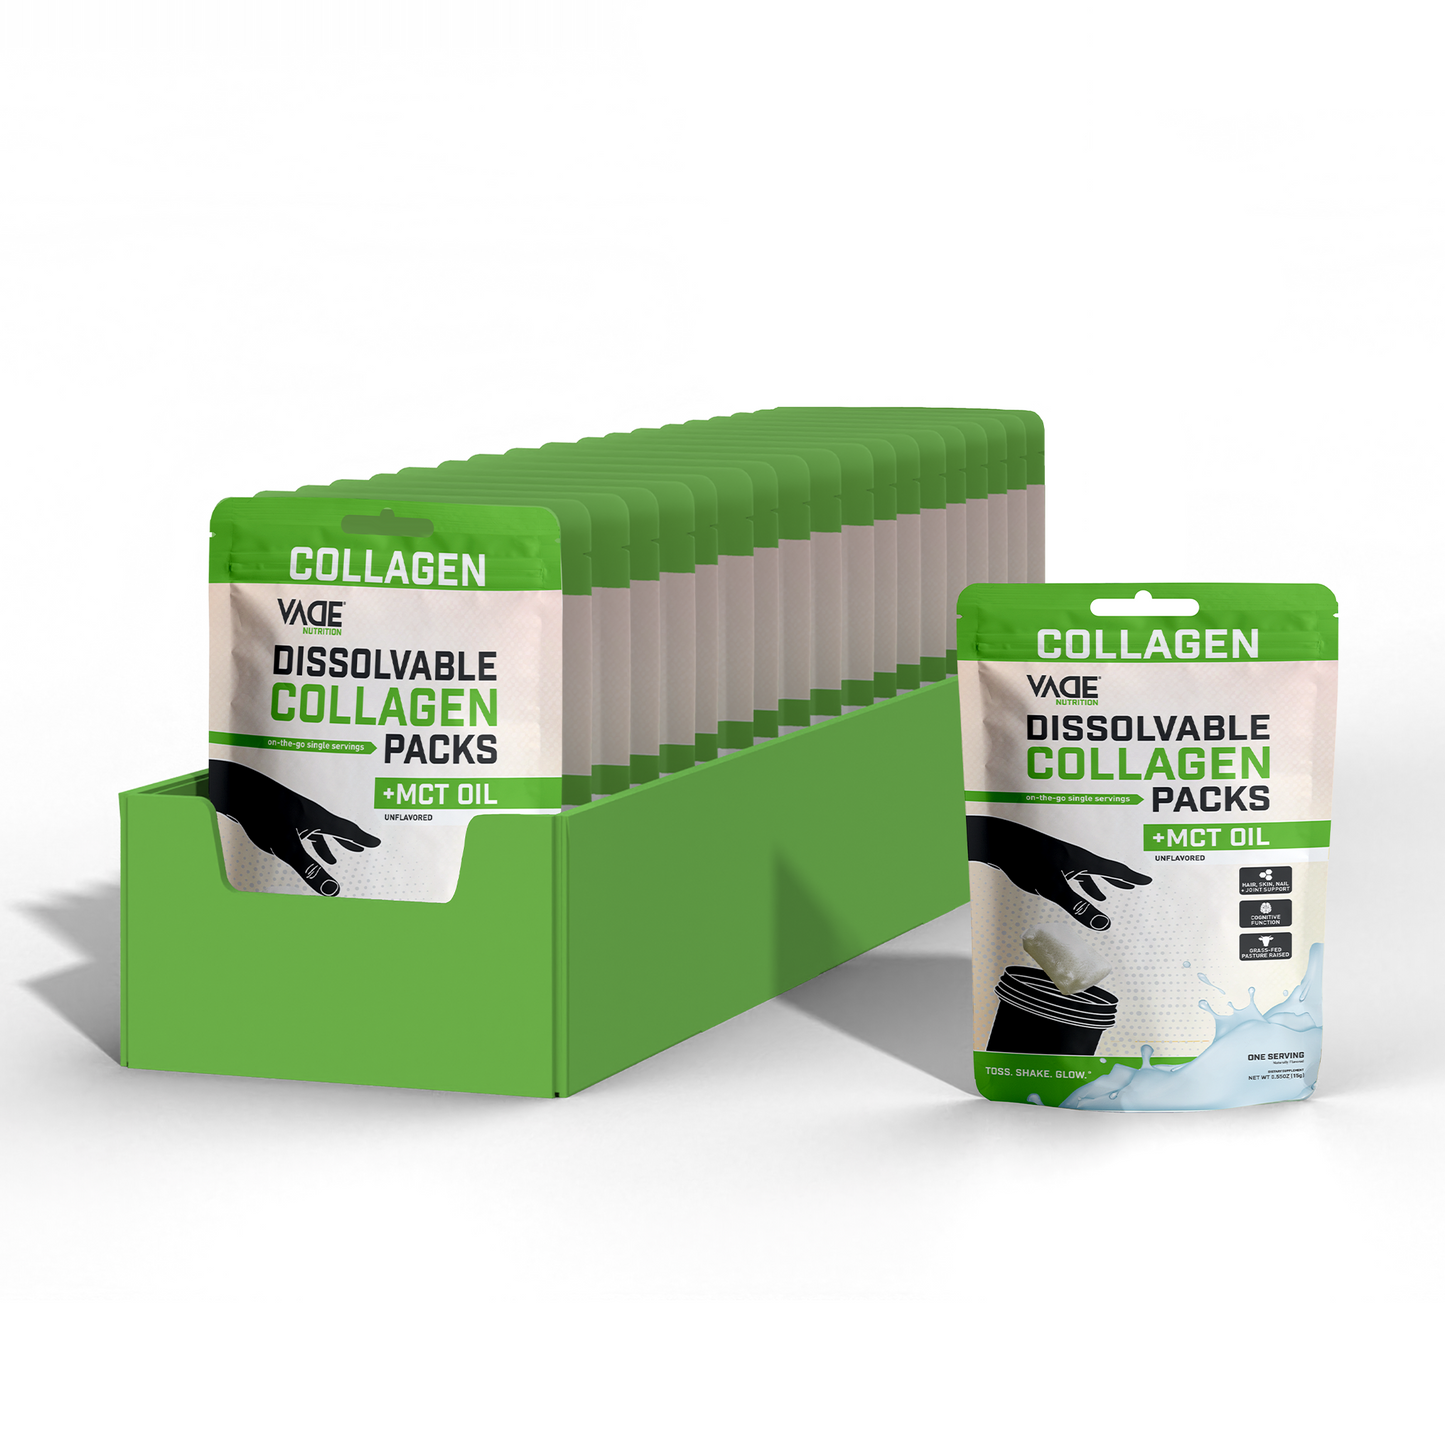 COLLAGEN + MCT OIL UNFLAVORED TRAVEL PACKS